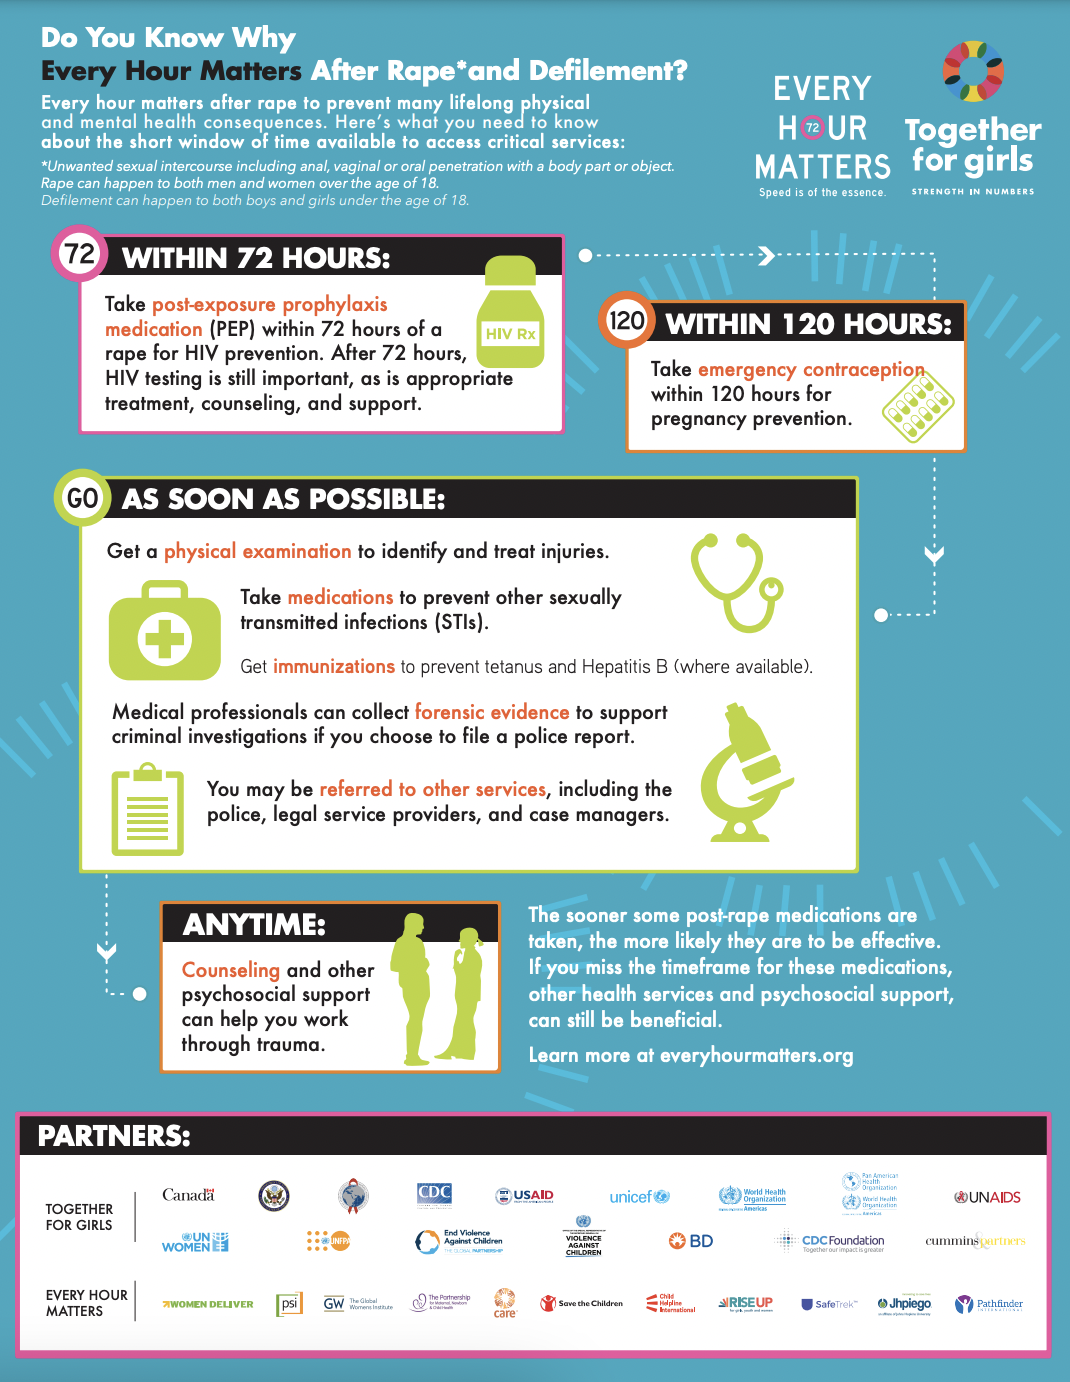 Every Hour Matters infographic